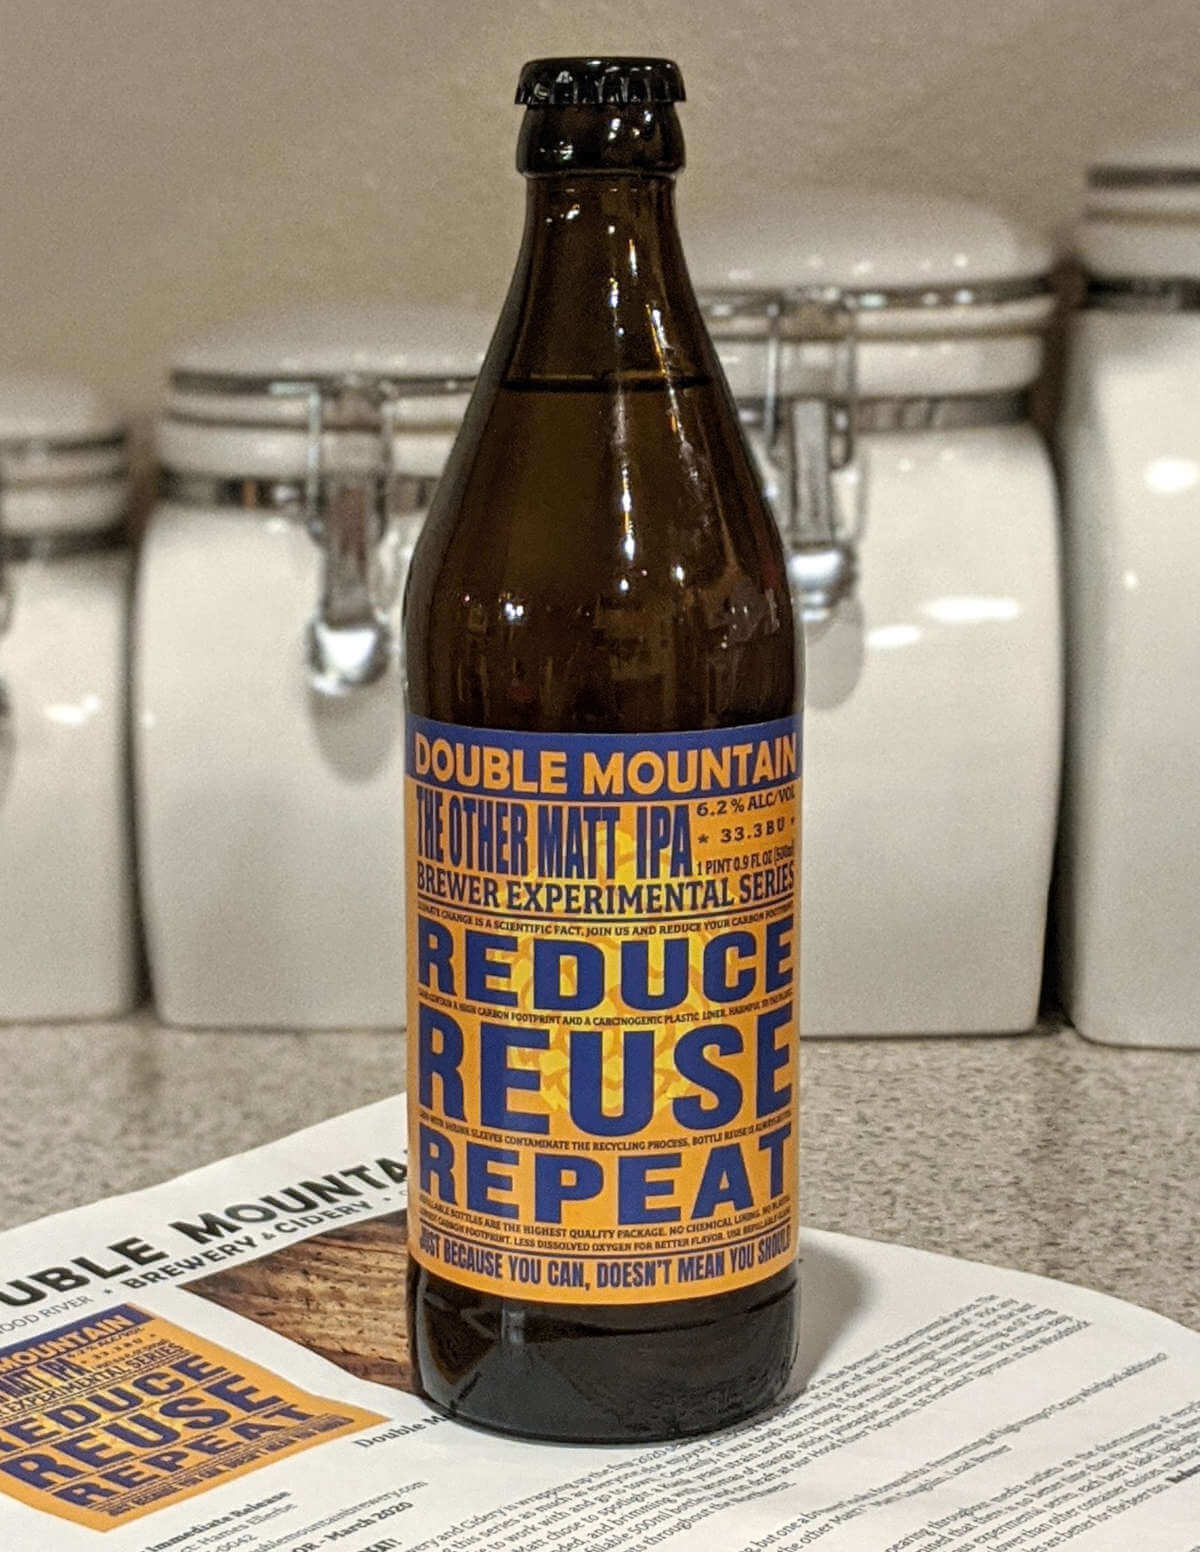 Received: Double Mountain The Other Matt IPA